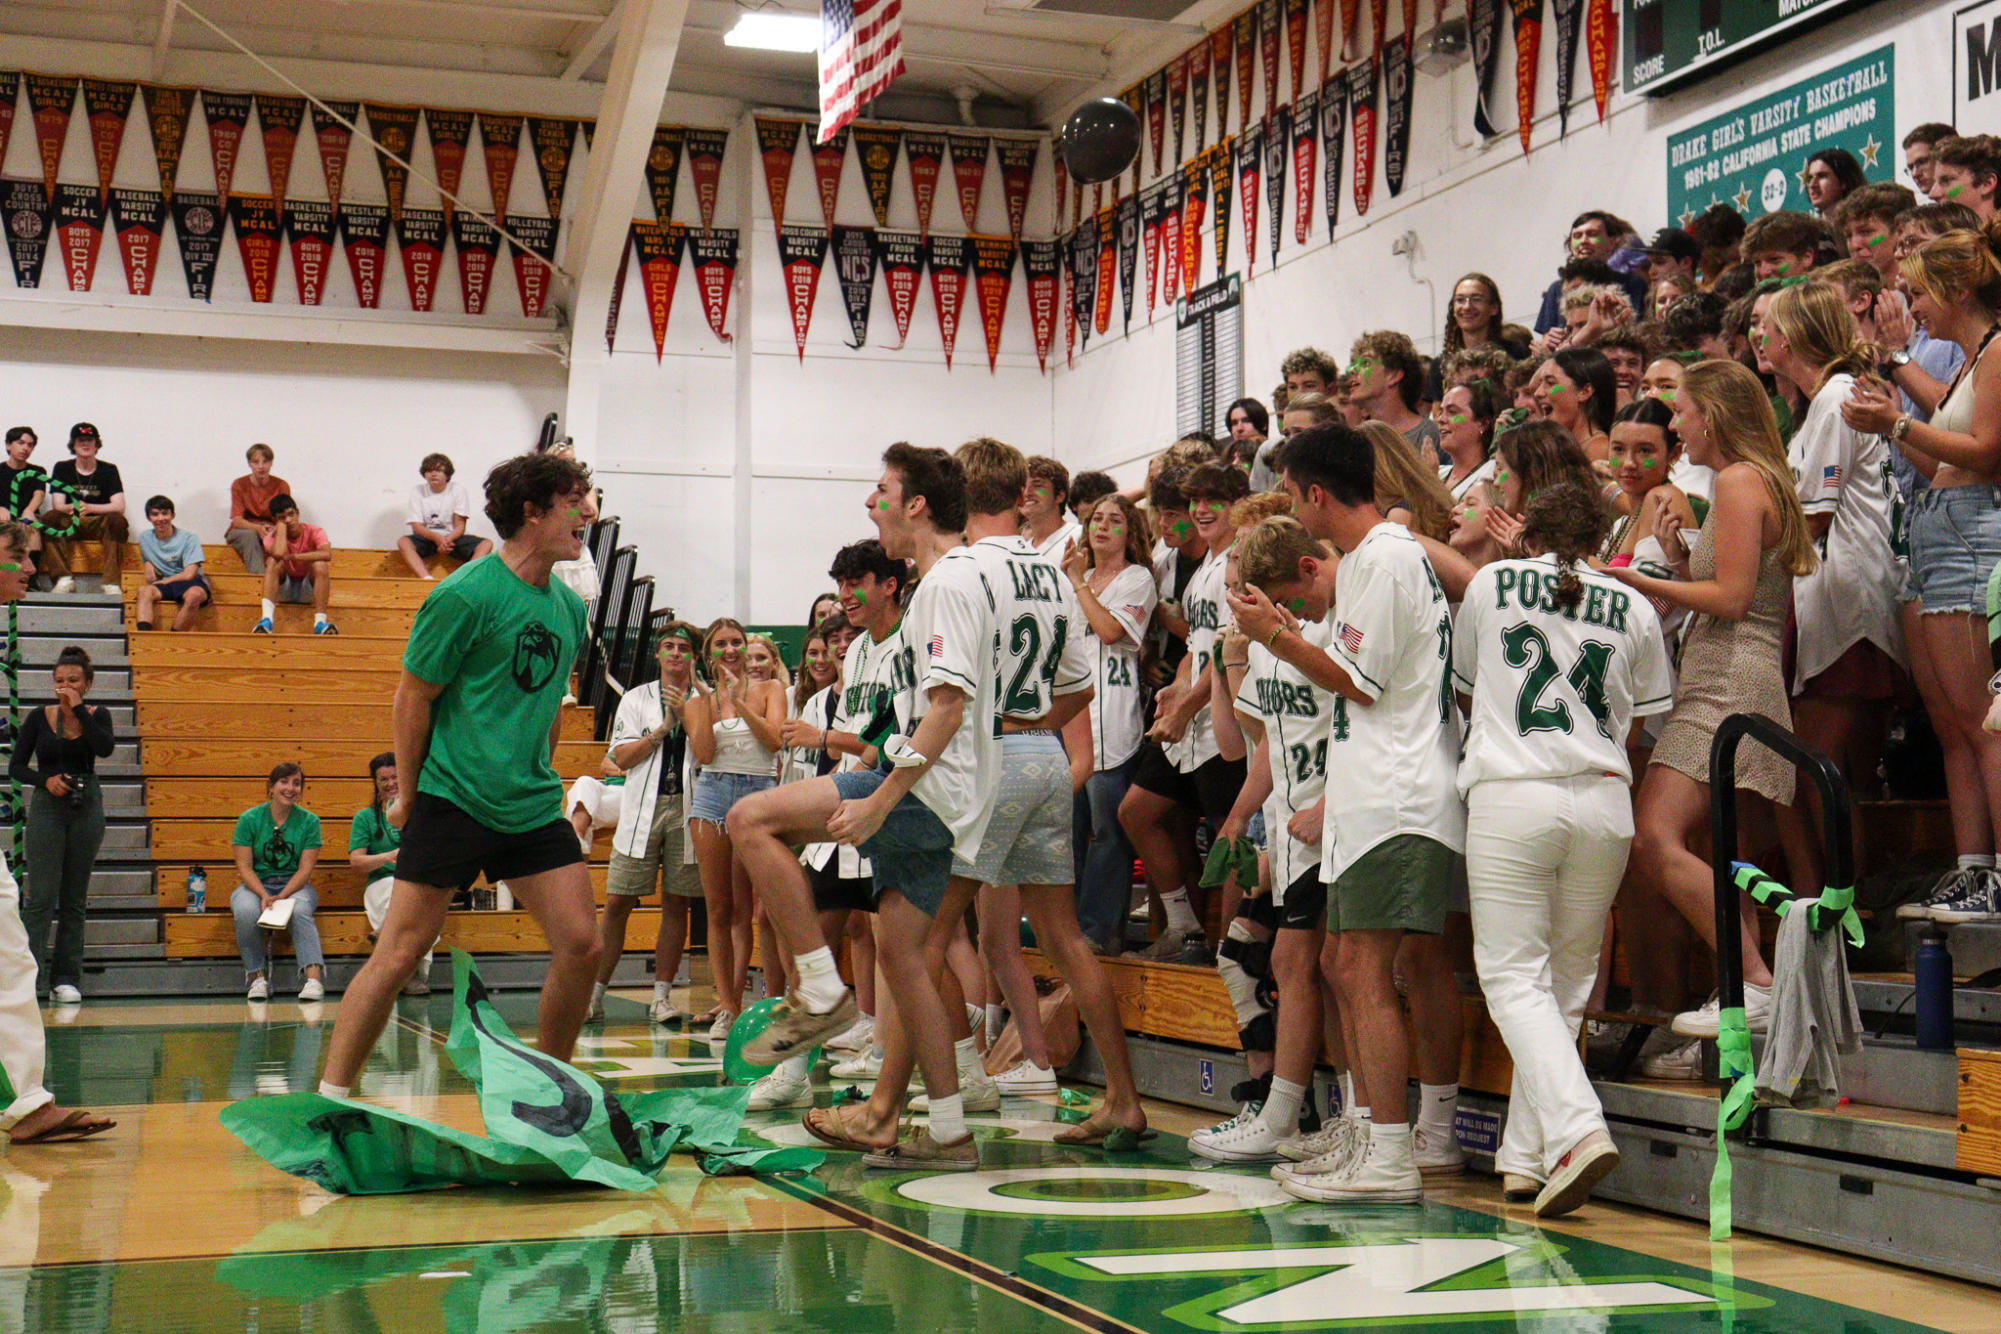 Senior Owen Bugas and senior Sutter OBrien cheer each other on in front of the Senior section.